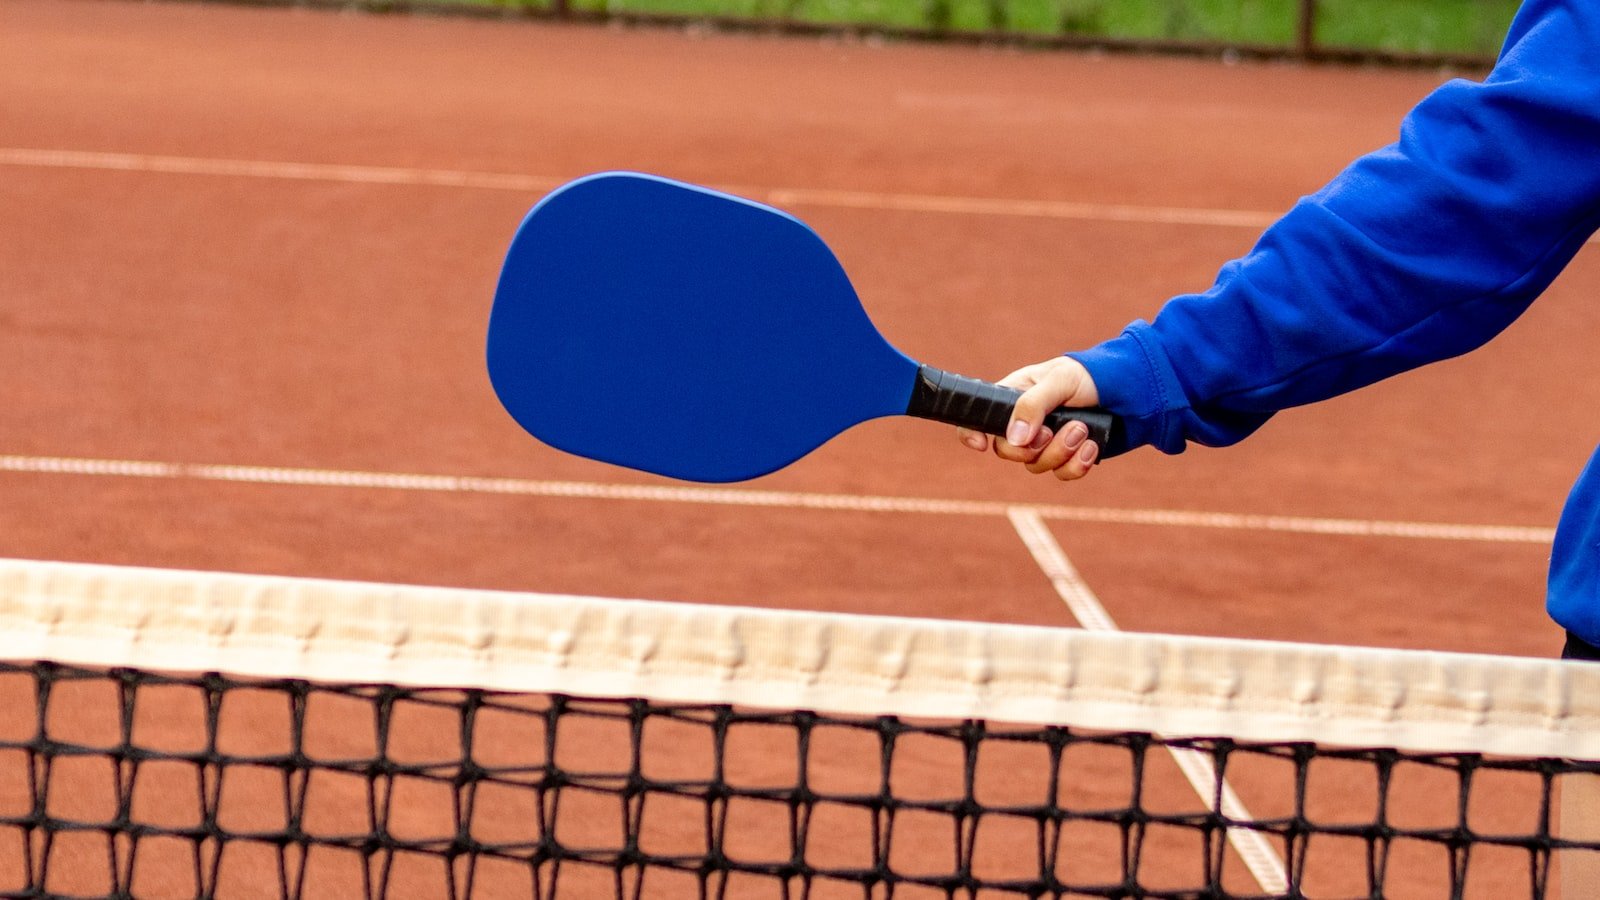 The Most Challenging Pickleball Courts: Test Your Skills